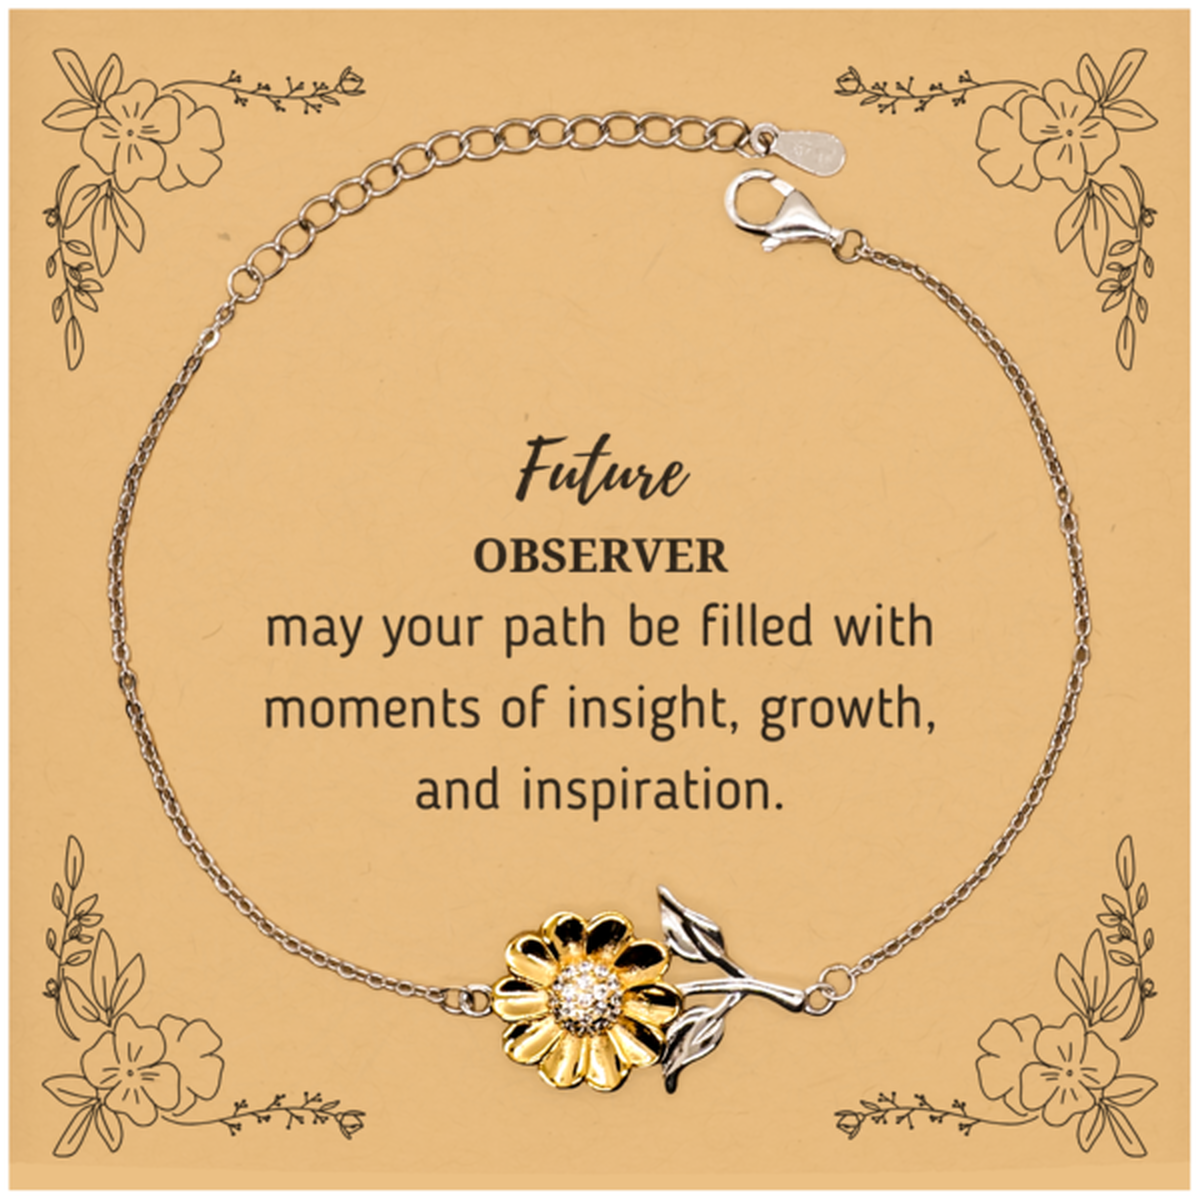 Future Observer Gifts, May your path be filled with moments of insight, Graduation Gifts for New Observer, Christmas Unique Sunflower Bracelet For Men, Women, Friends